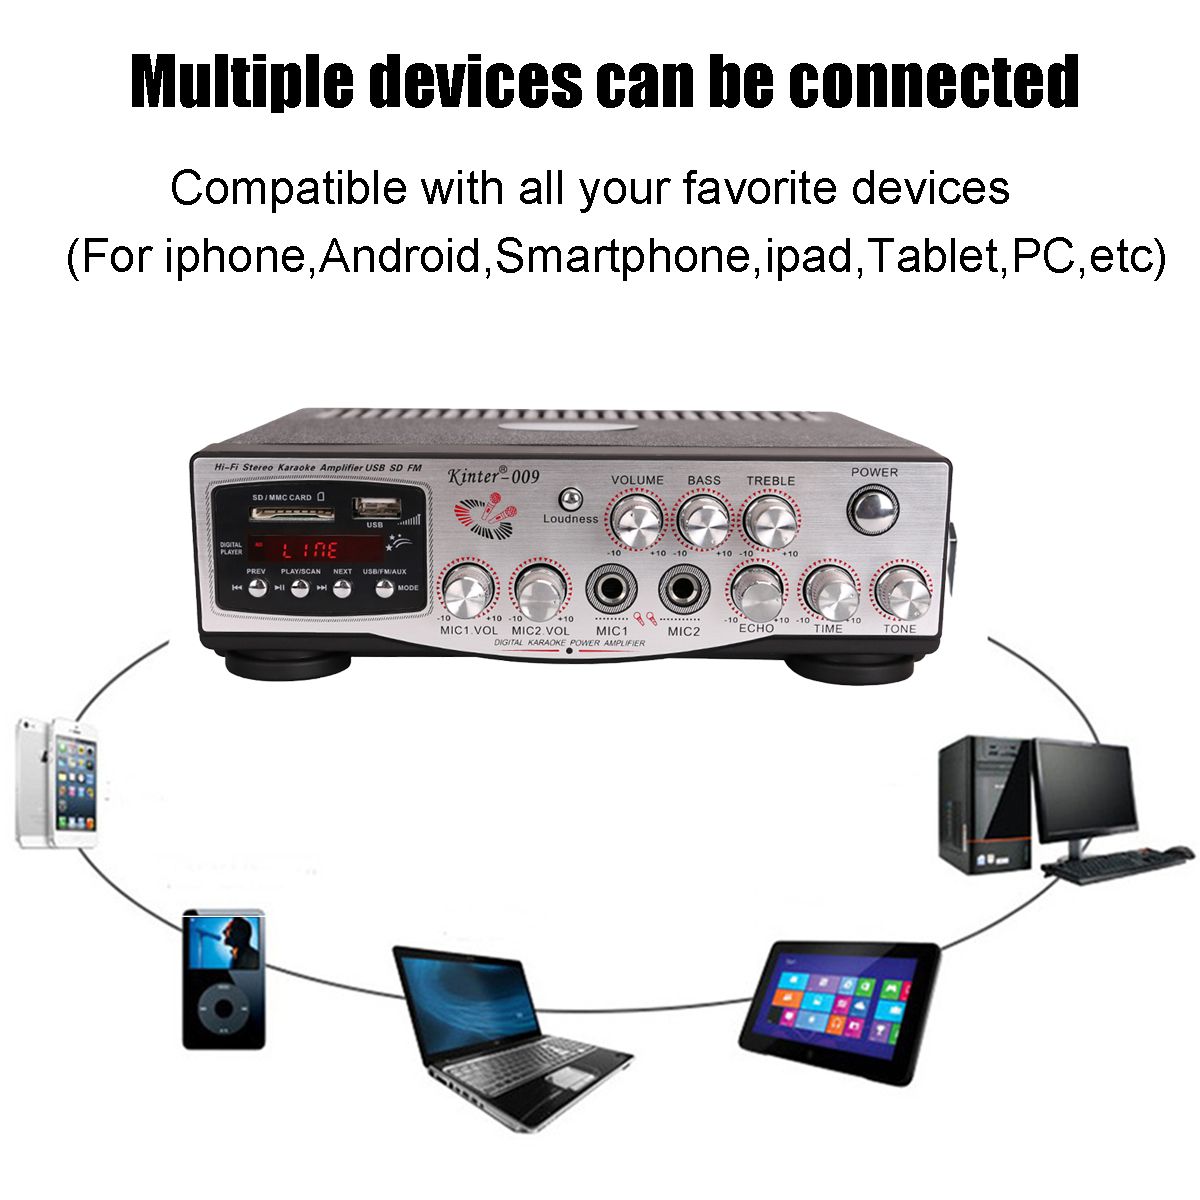 Kinter-009-2x100W-HIFI-Lossless-Amplifier-220V-with-Remote-Control-Support-Memory-Card-USB-FM-Microp-1559946